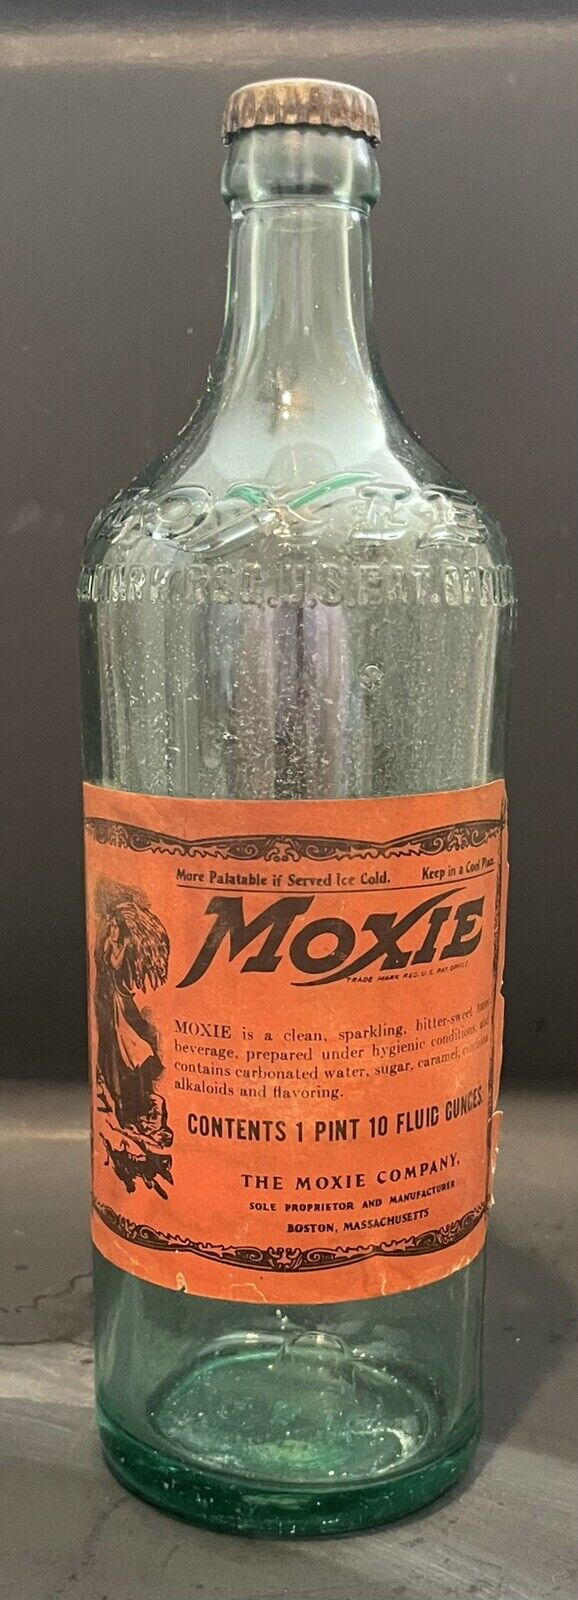 Original Vintage 1 Pint 10 Oz Moxie Bottle With Label And Intact Cap -empty-